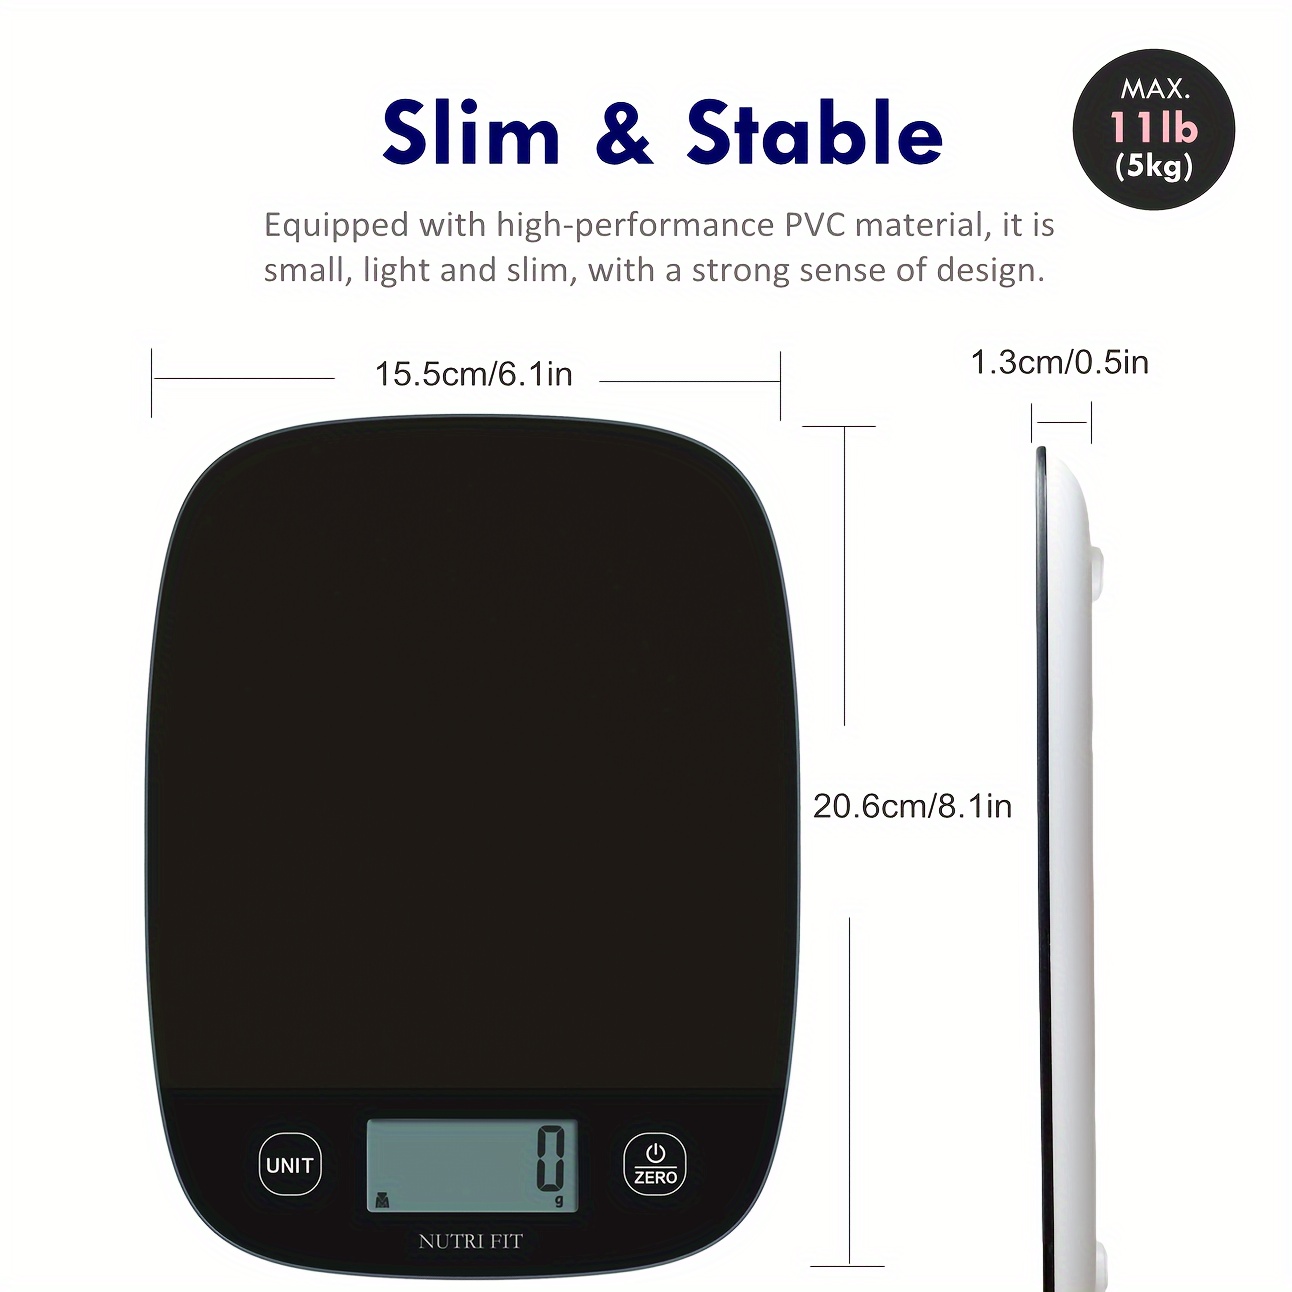 Kitchen Scale Digital Food Scales Weight Grams and oz in 1g/0.1oz High  Precise, Small and Super Thin, with Multiple Weighting Units in lb, oz, Gram,  ml for Weight Loss Meal Prep price